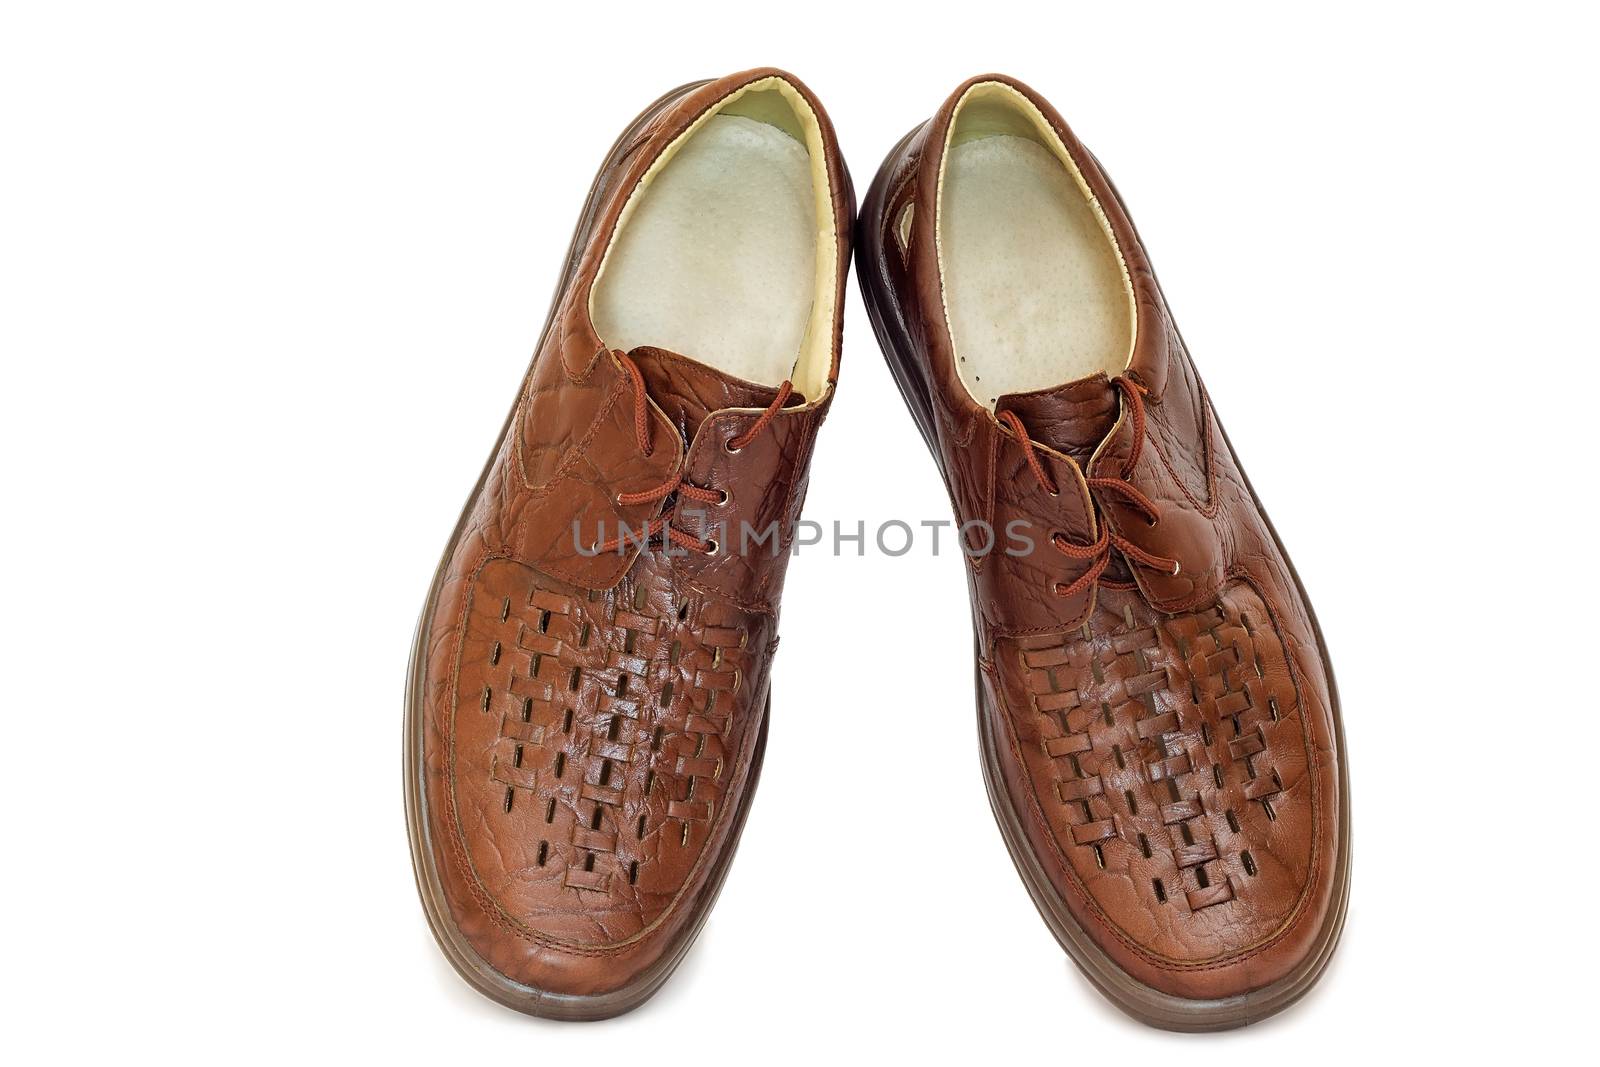 Men's leather shoes on a white background. by georgina198